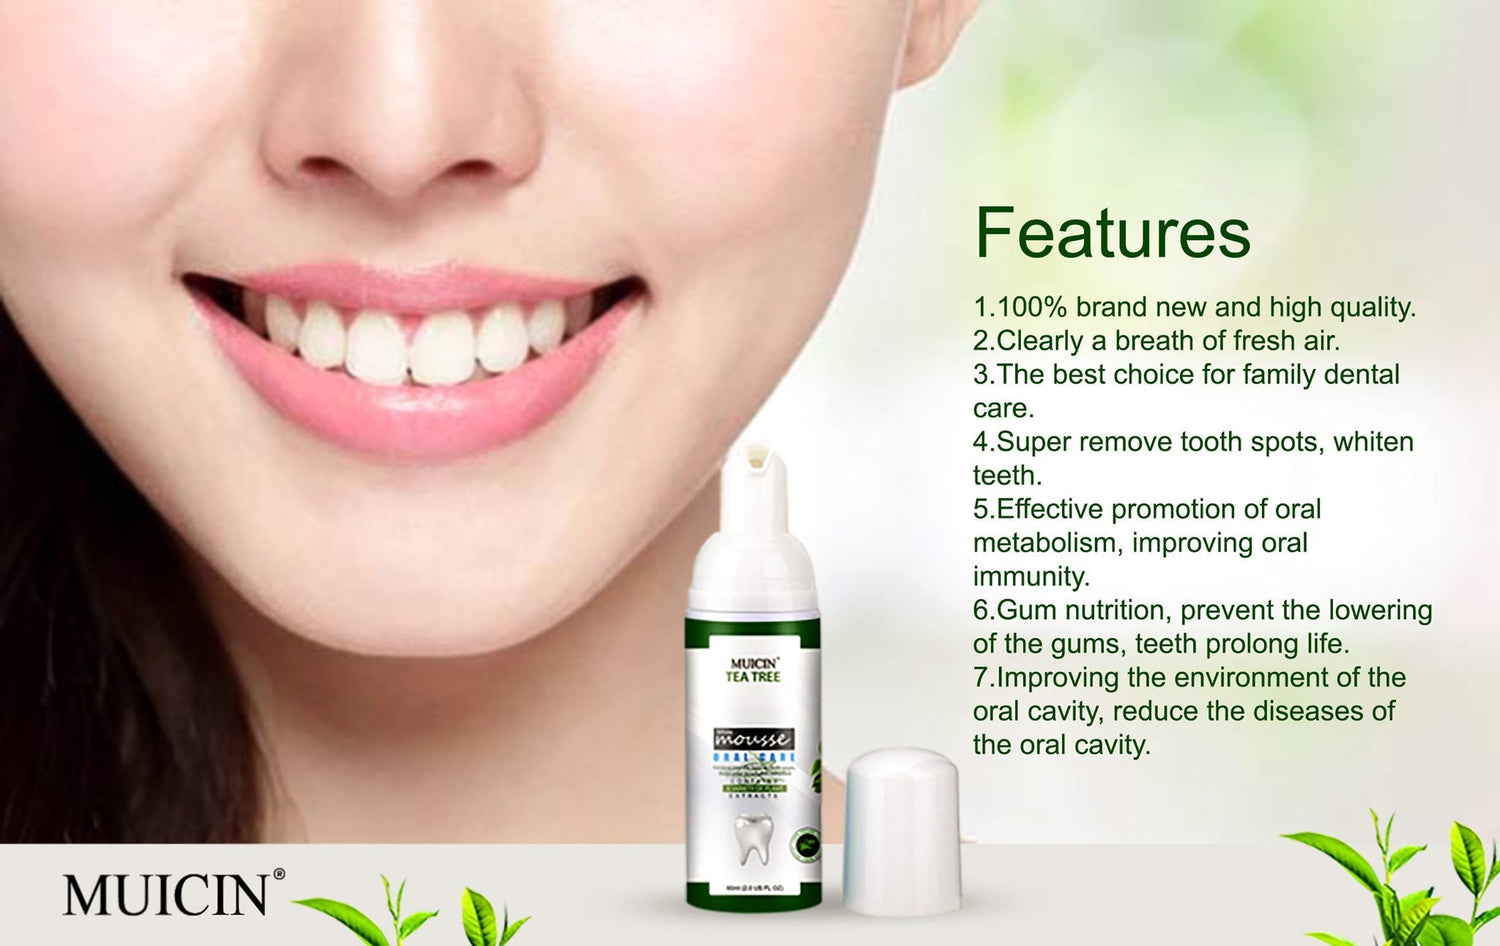 ORAL HEALTH MOUSSE CARE - REVOLUTIONIZE YOUR DENTAL ROUTINE